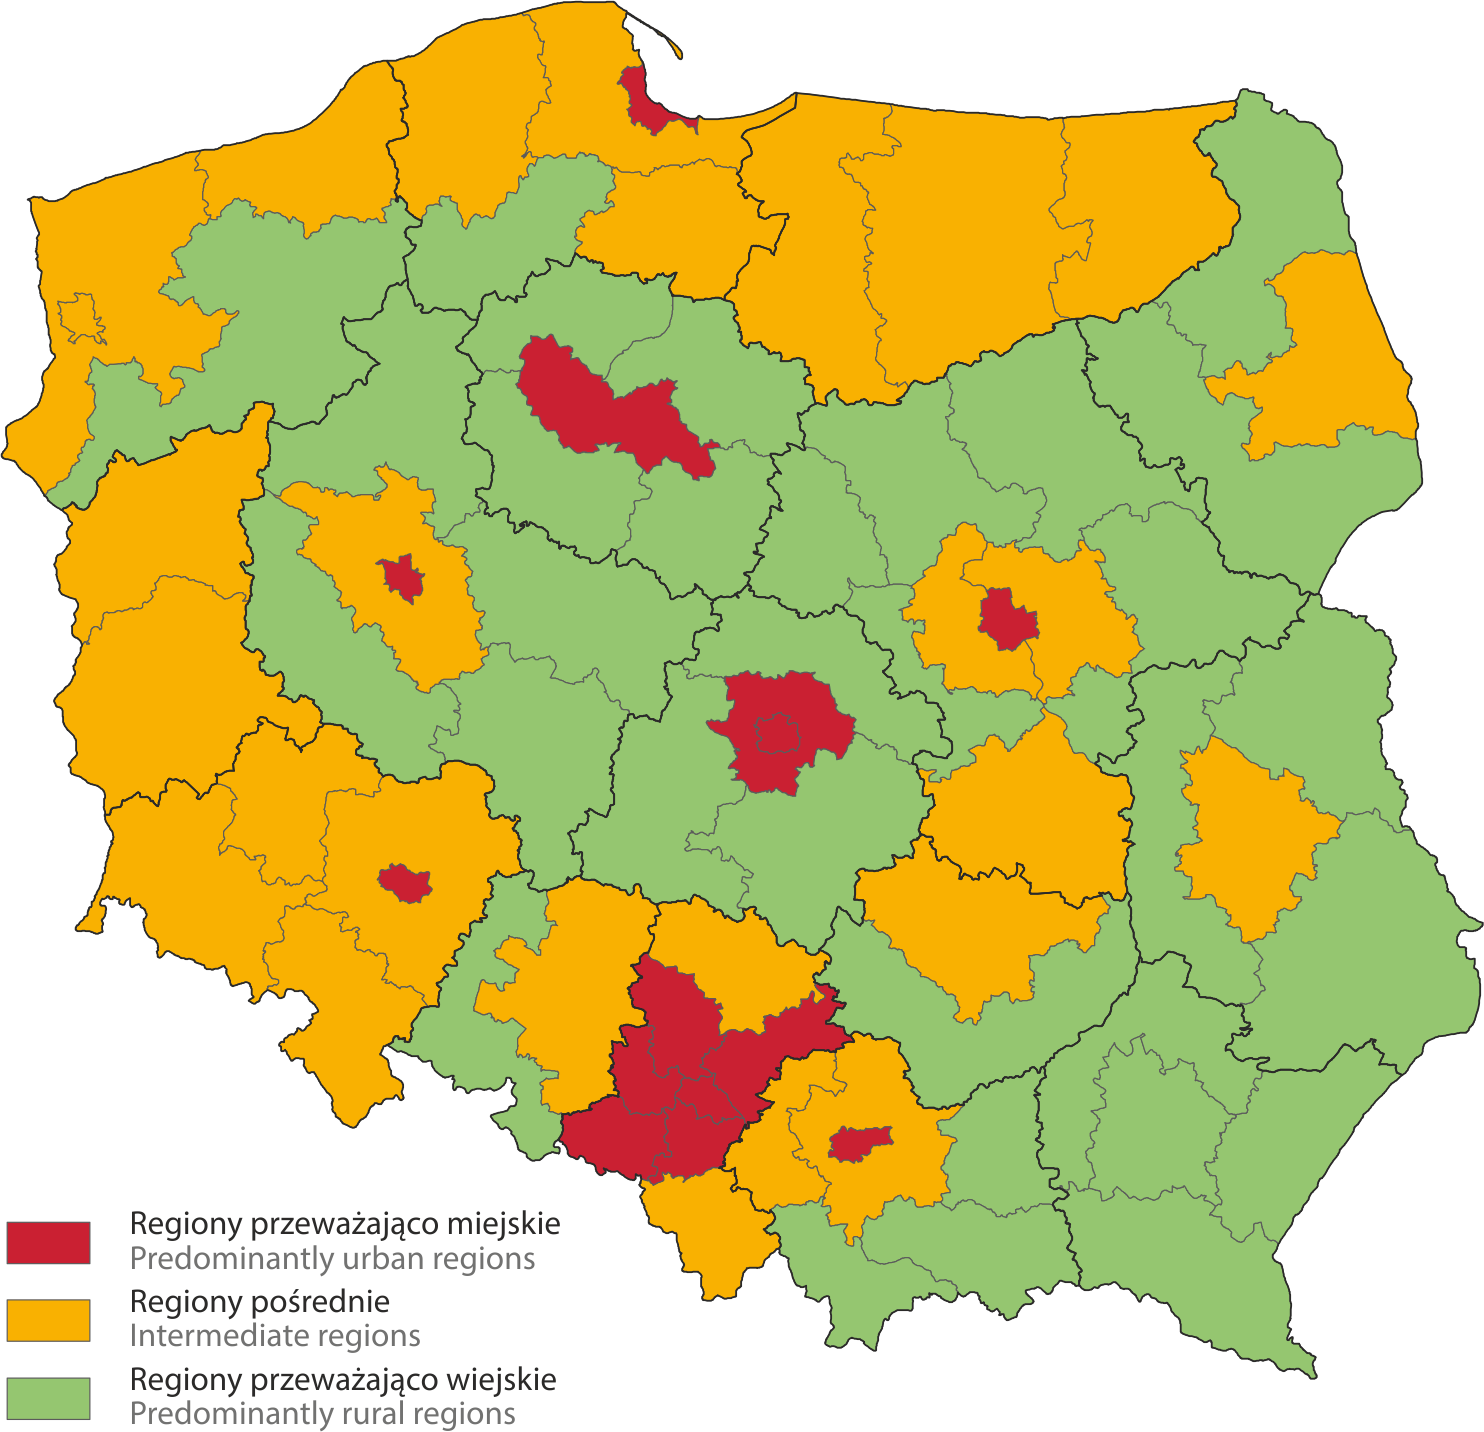 The urban-rural typology in Poland according to the NUTS 2016 revision